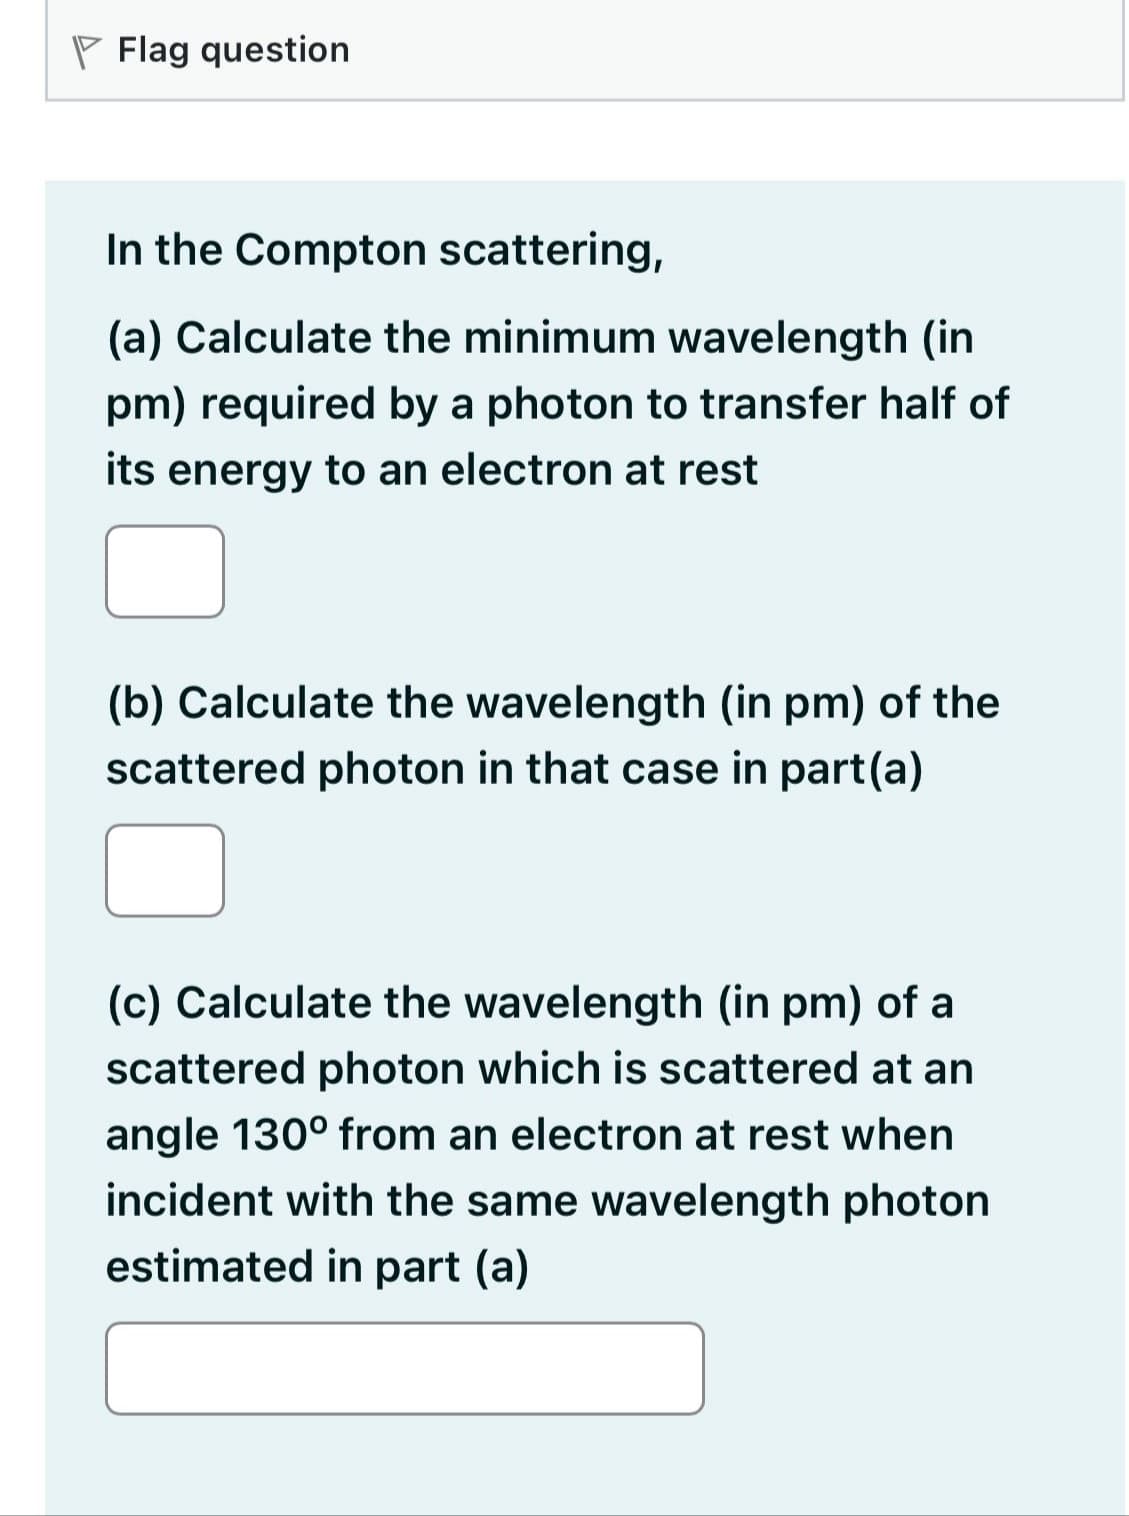 Flag question
In the Compton scattering,
(a) Calculate the minimum wavelength (in
pm) required by a photon to transfer half of
its energy to an electron at rest
(b) Calculate the wavelength (in pm) of the
scattered photon in that case in part(a)
(c) Calculate the wavelength (in pm) of a
scattered photon which is scattered at an
angle 130° from an electron at rest when
incident with the same wavelength photon
estimated in part (a)